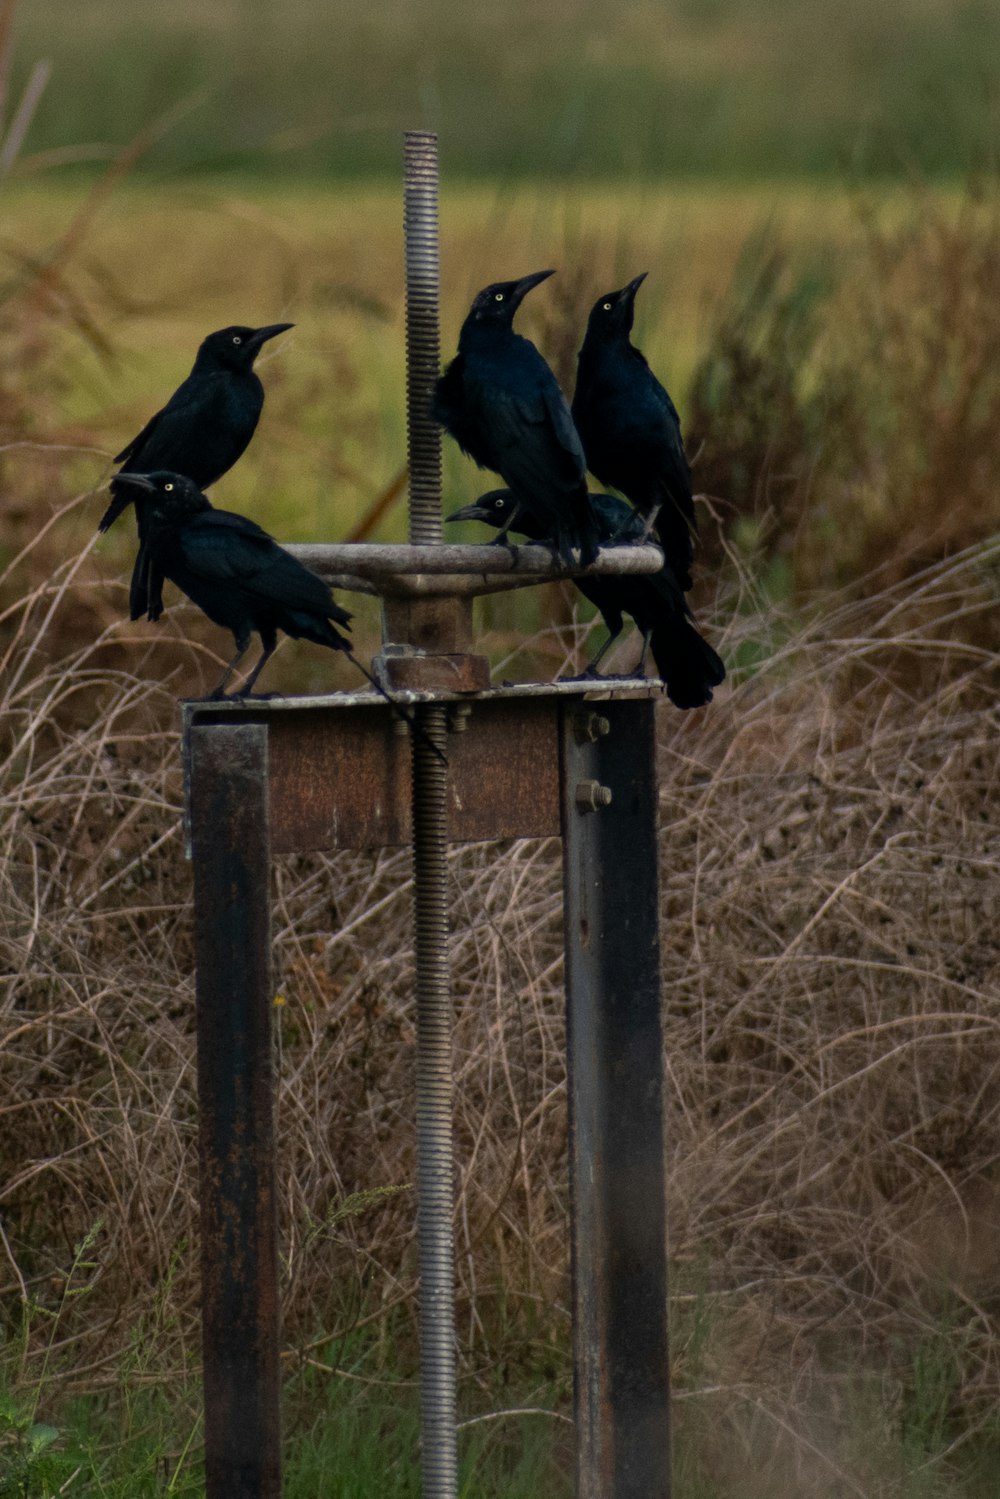 a group of black birds sitting on top of a metal pole